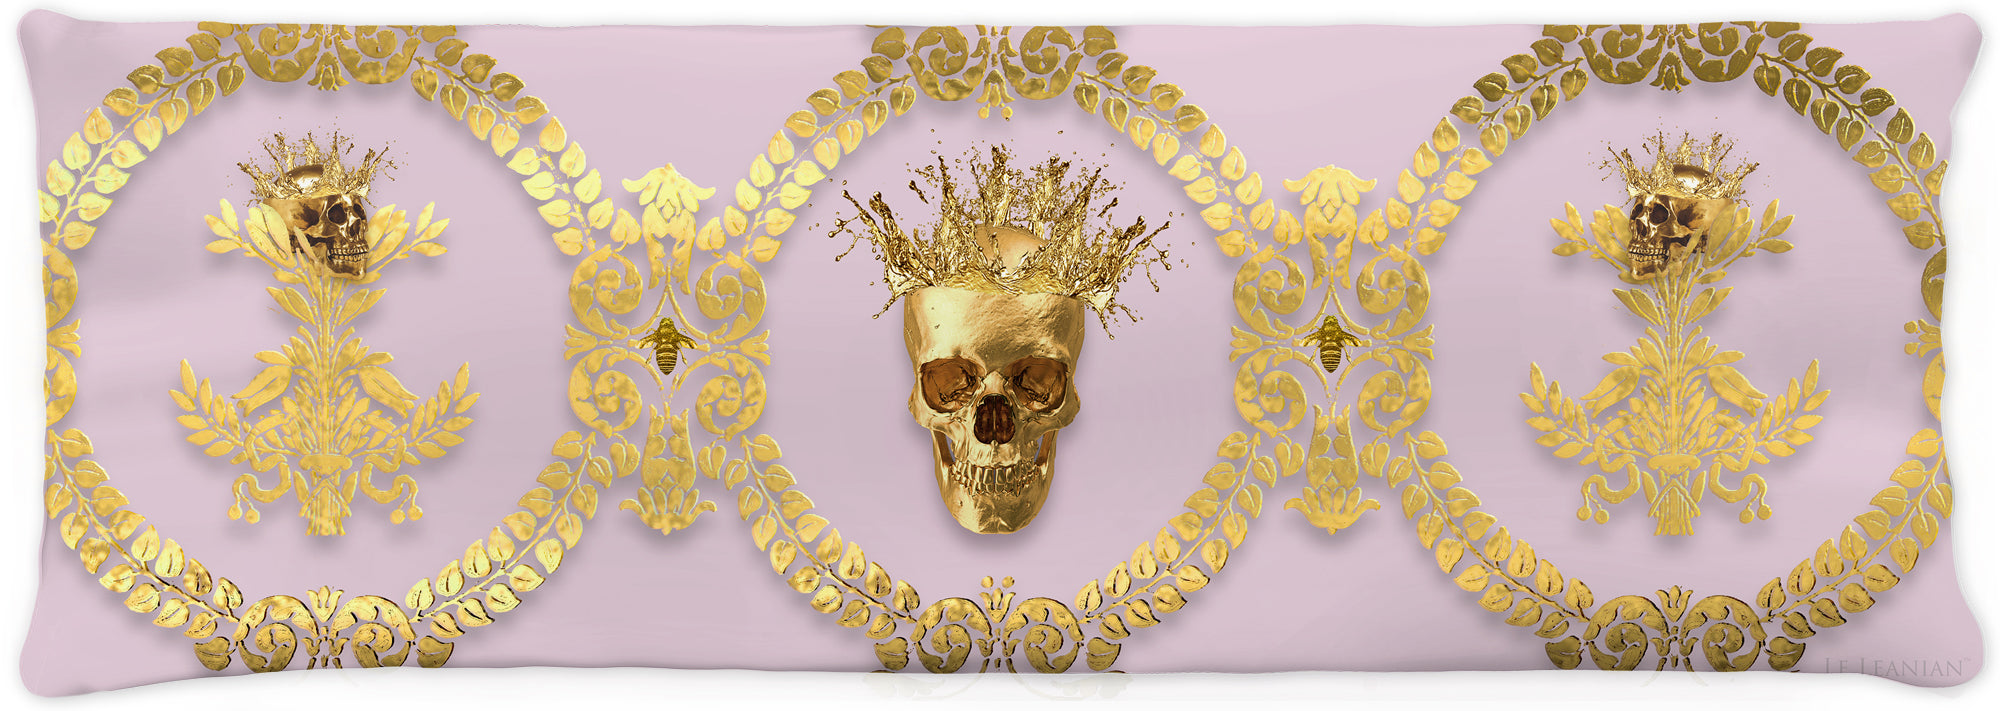 CROWN GOLD SKULL-GOLD RIBS-Body Pillow-PILLOW CASE- color PASTEL PINK